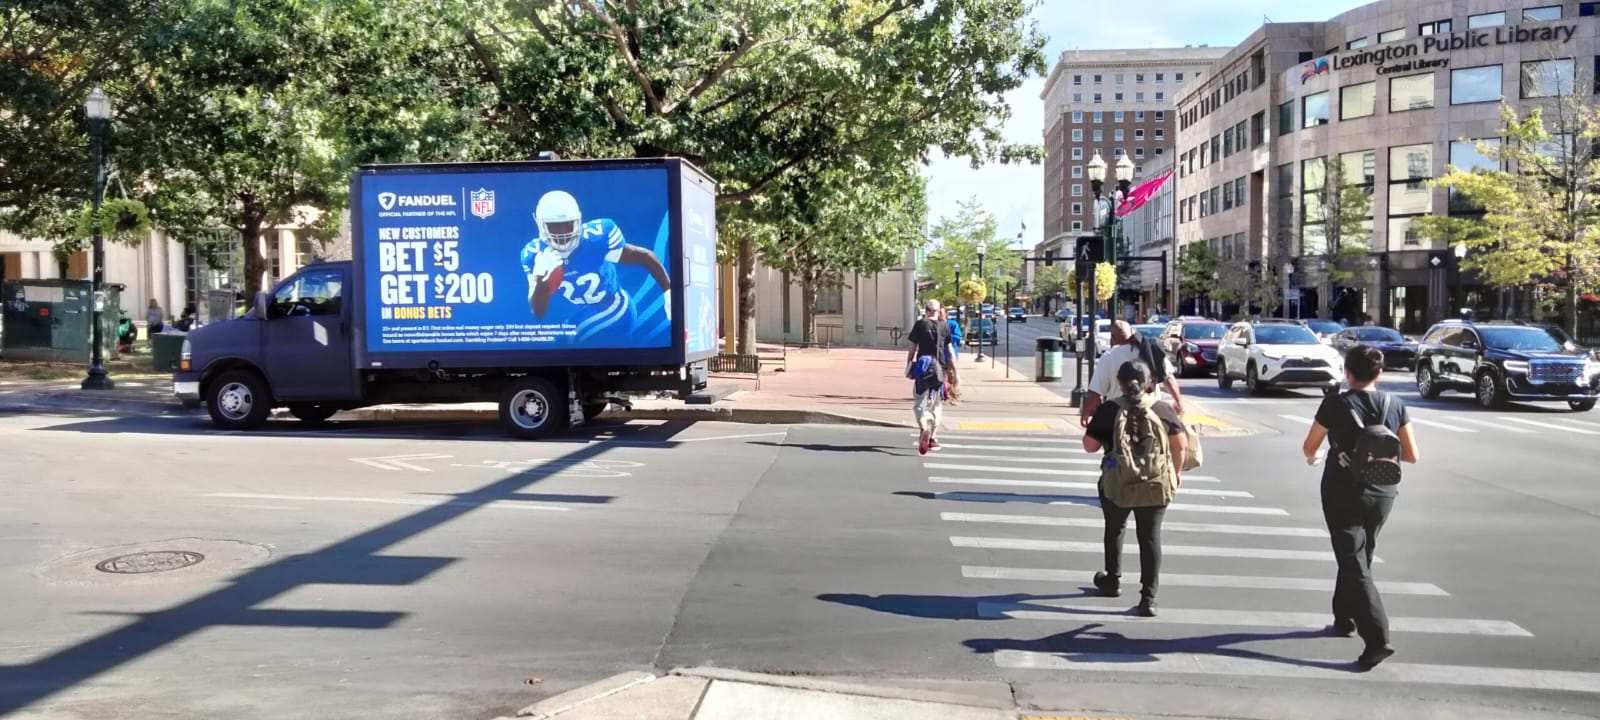 Cantmiss.us digital mobile billboard truck parked on the side of street with an image of a NFL player next to a Fandeul Ad for new customers.